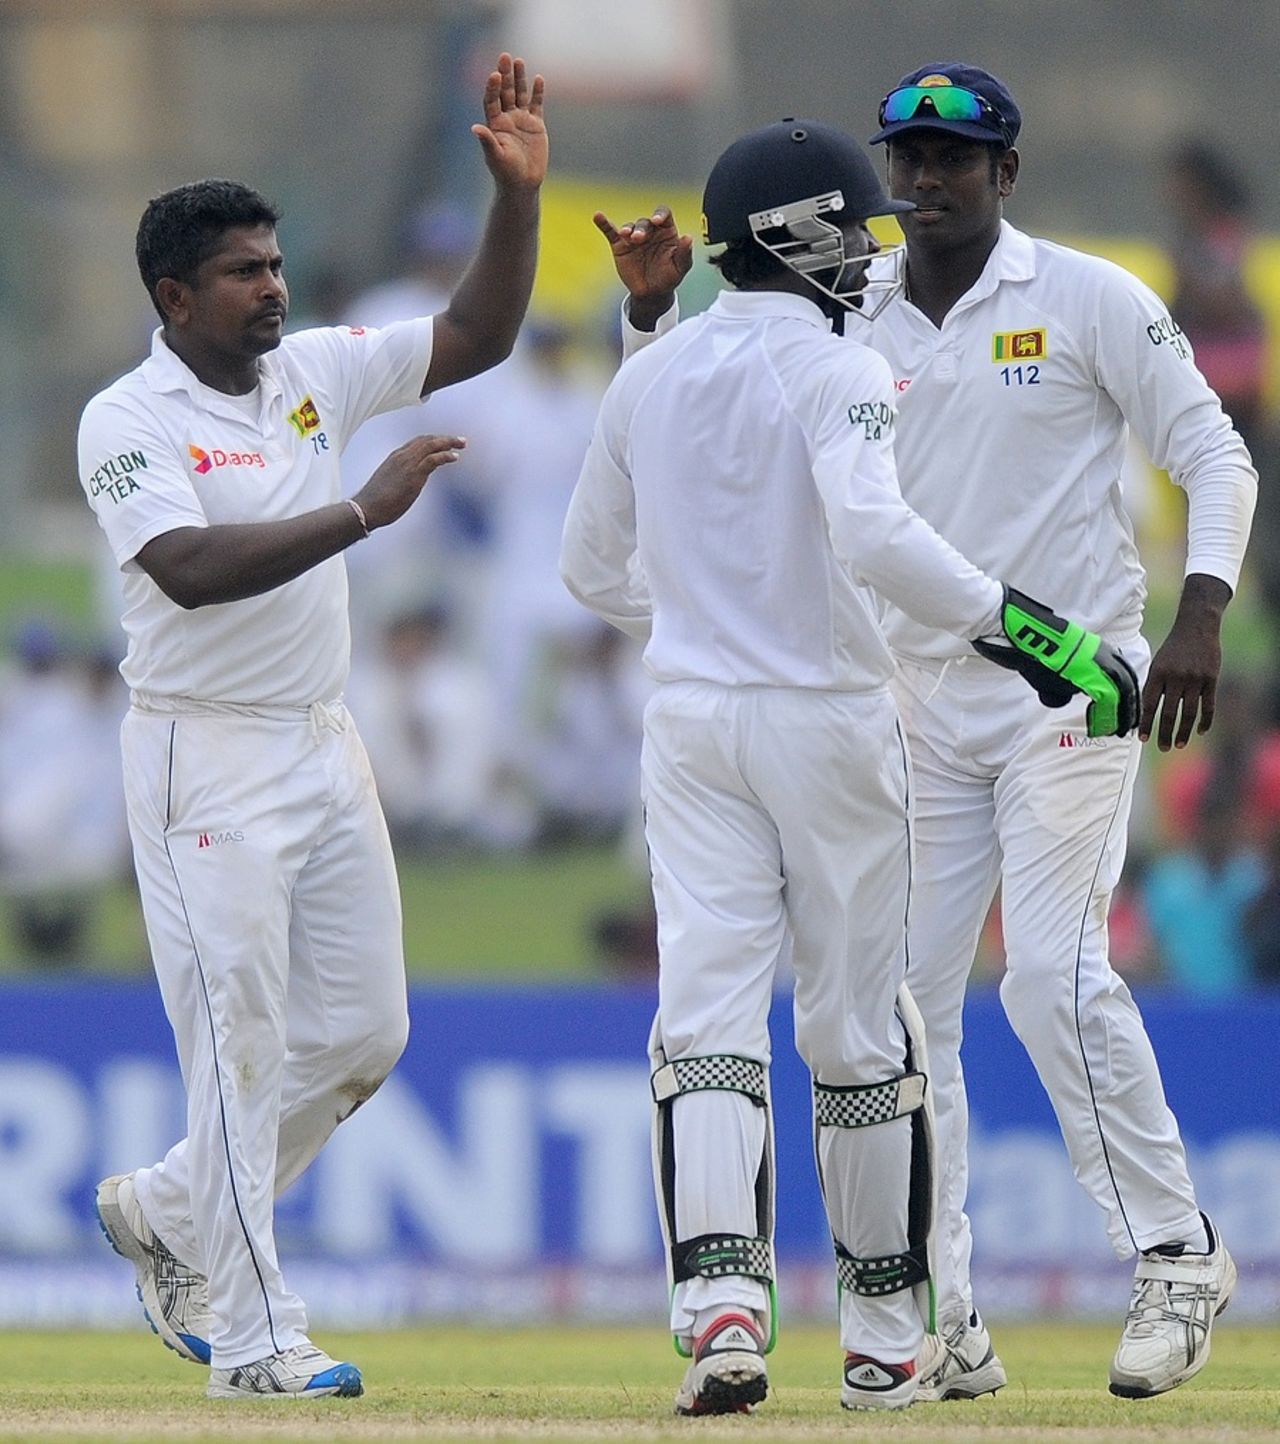 Rangana Herath removed Misbah-ul-Haq with a beauty, Sri Lanka v Pakistan, 1st Test, Galle, 1st day, August 6, 2014